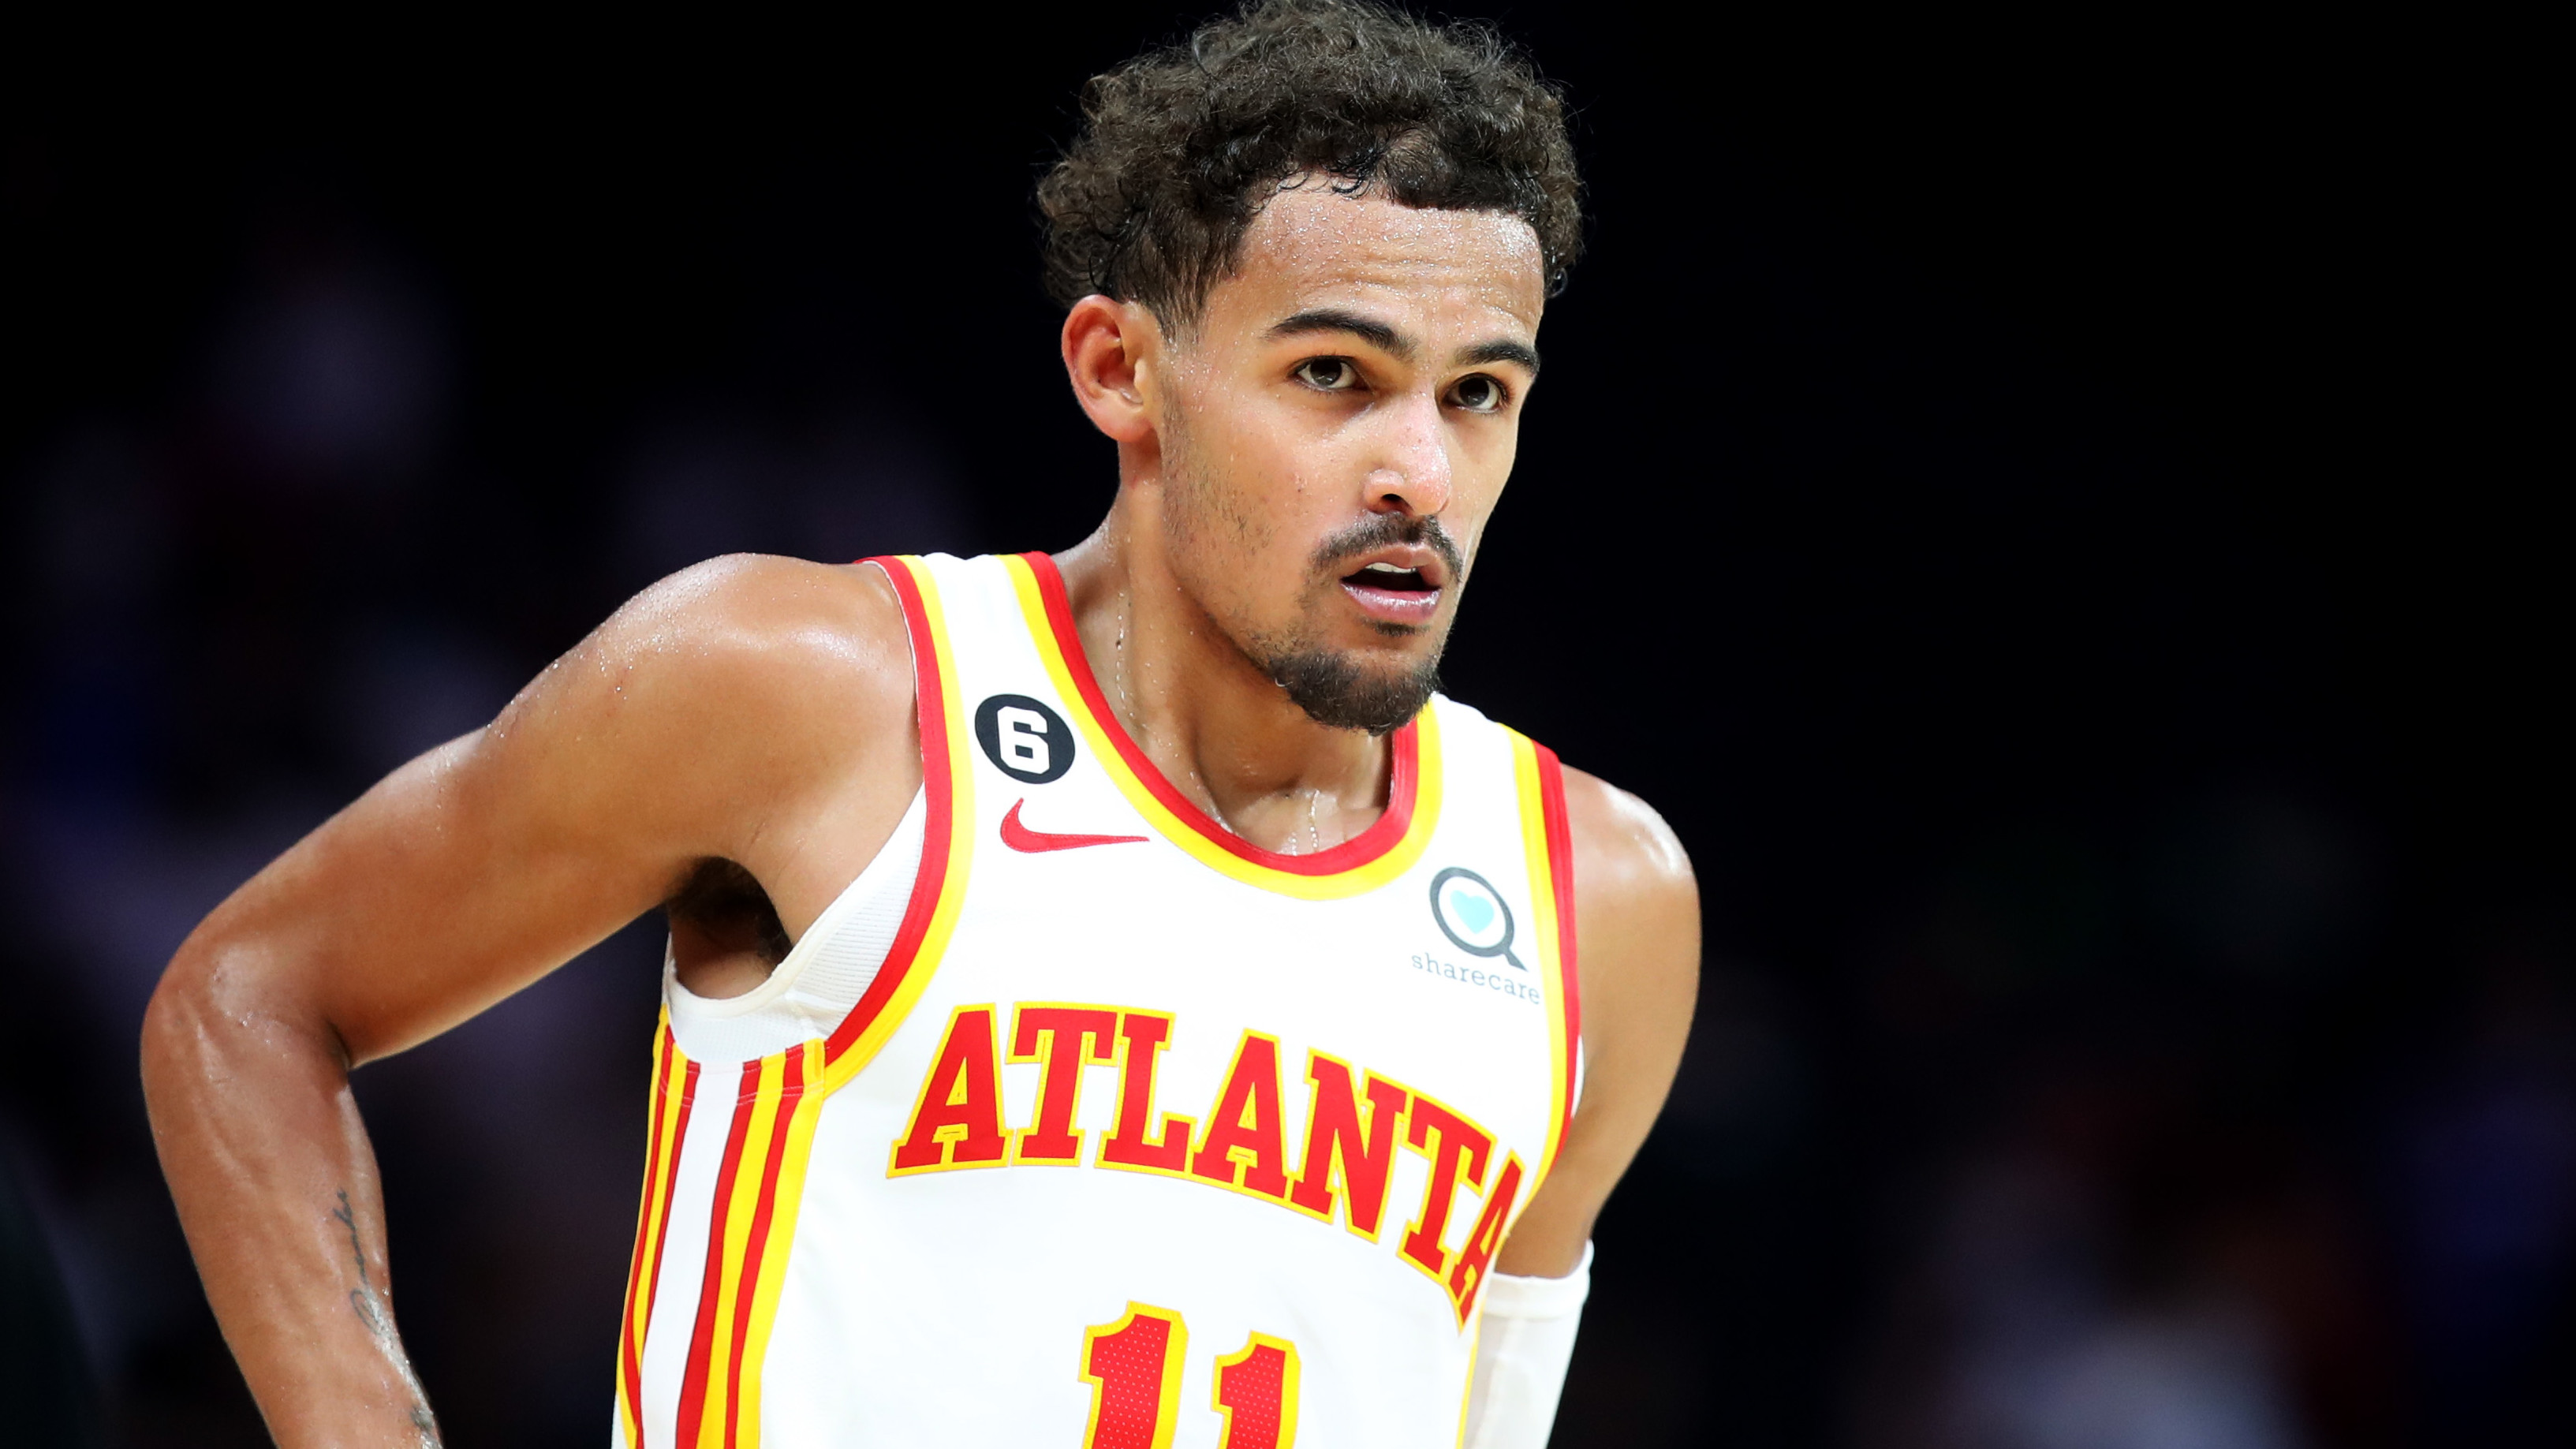 The problems behind Trae Young's signature plays - ESPN